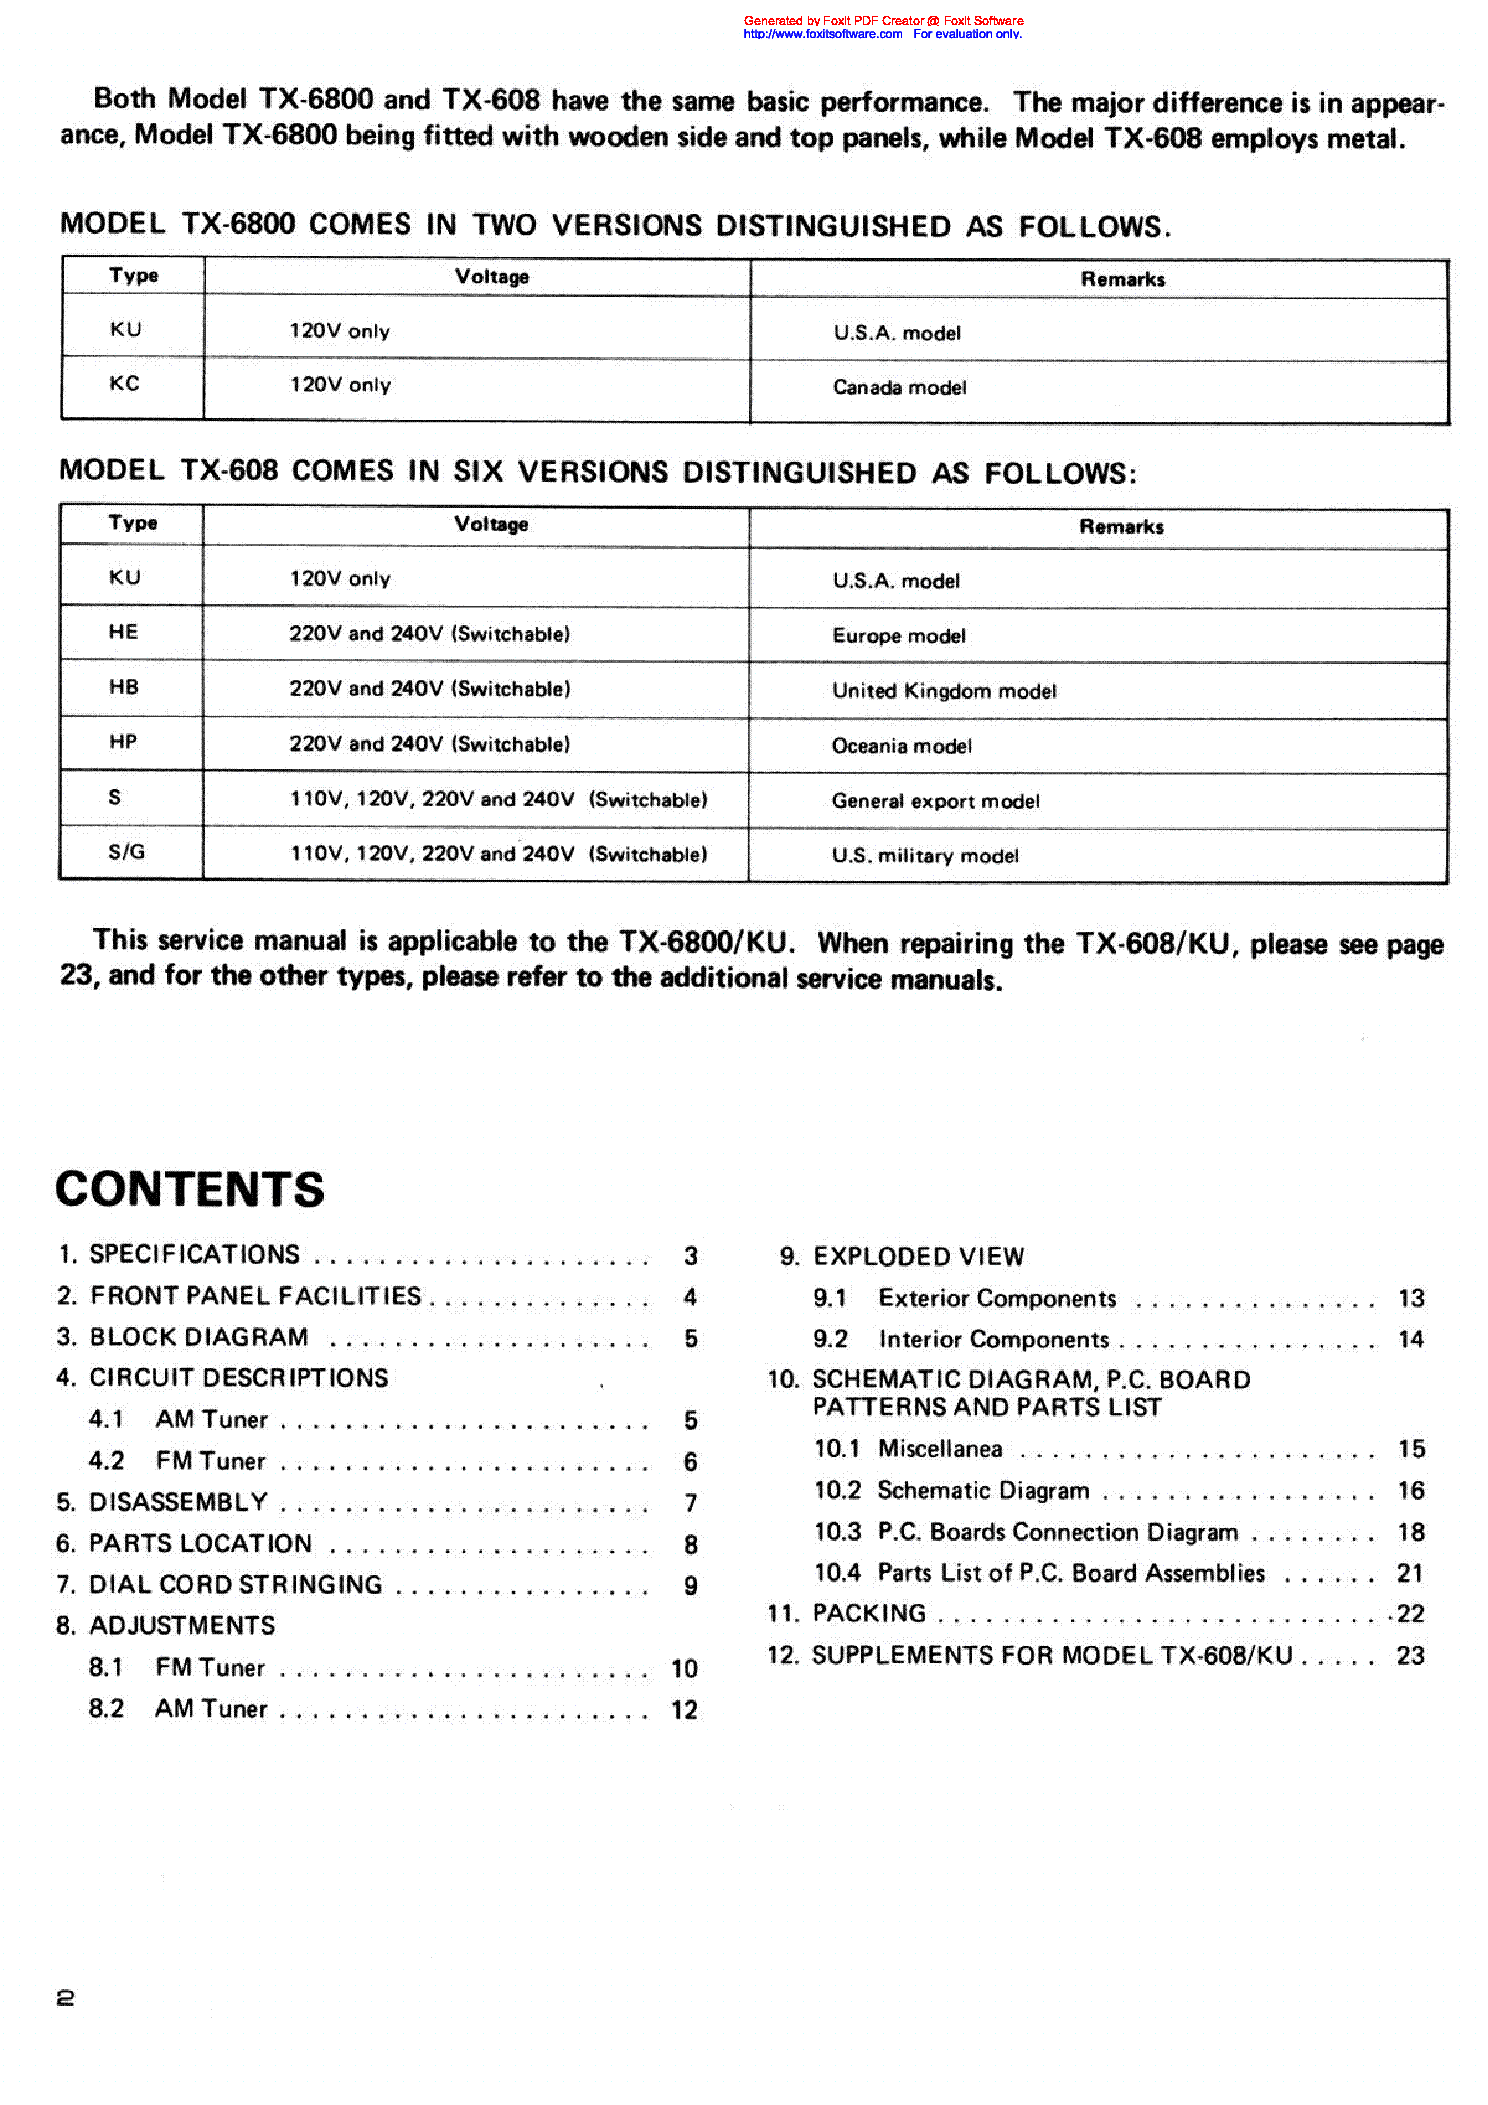 PIONEER TX-608 6800 service manual (2nd page)